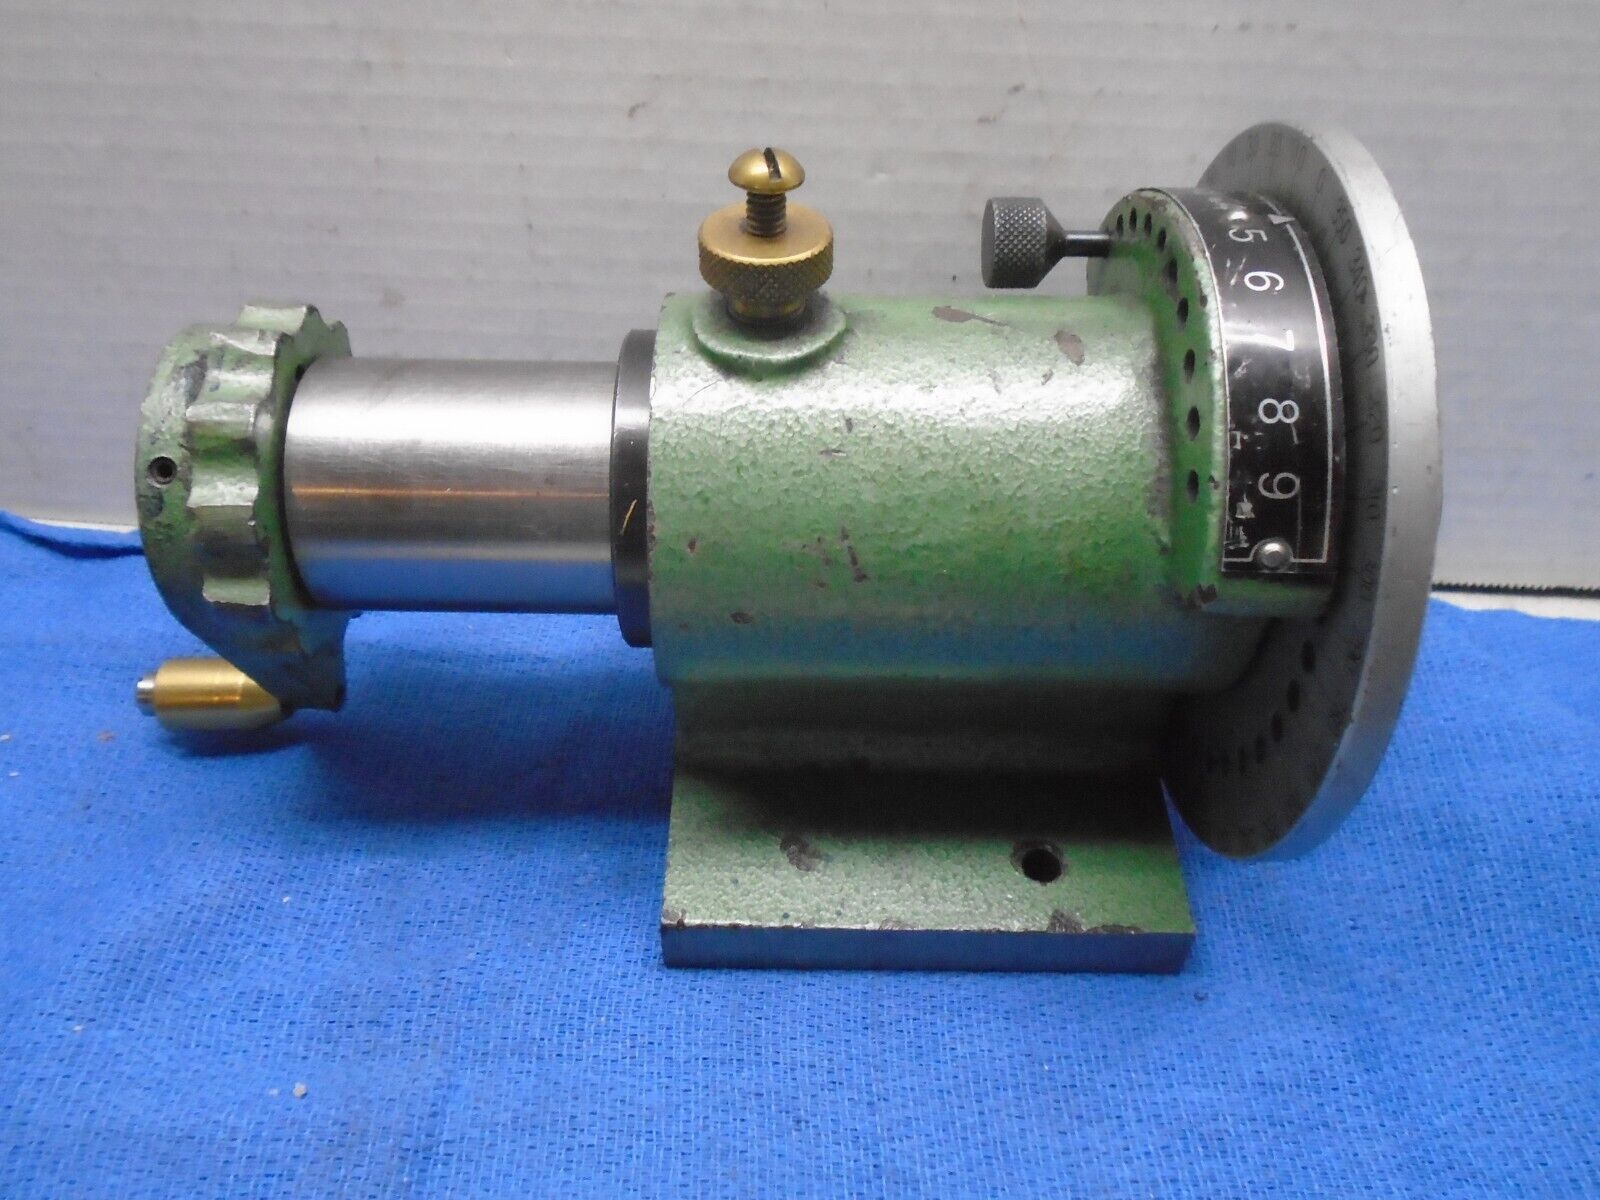 5c Collet Spin Indexing Fixture